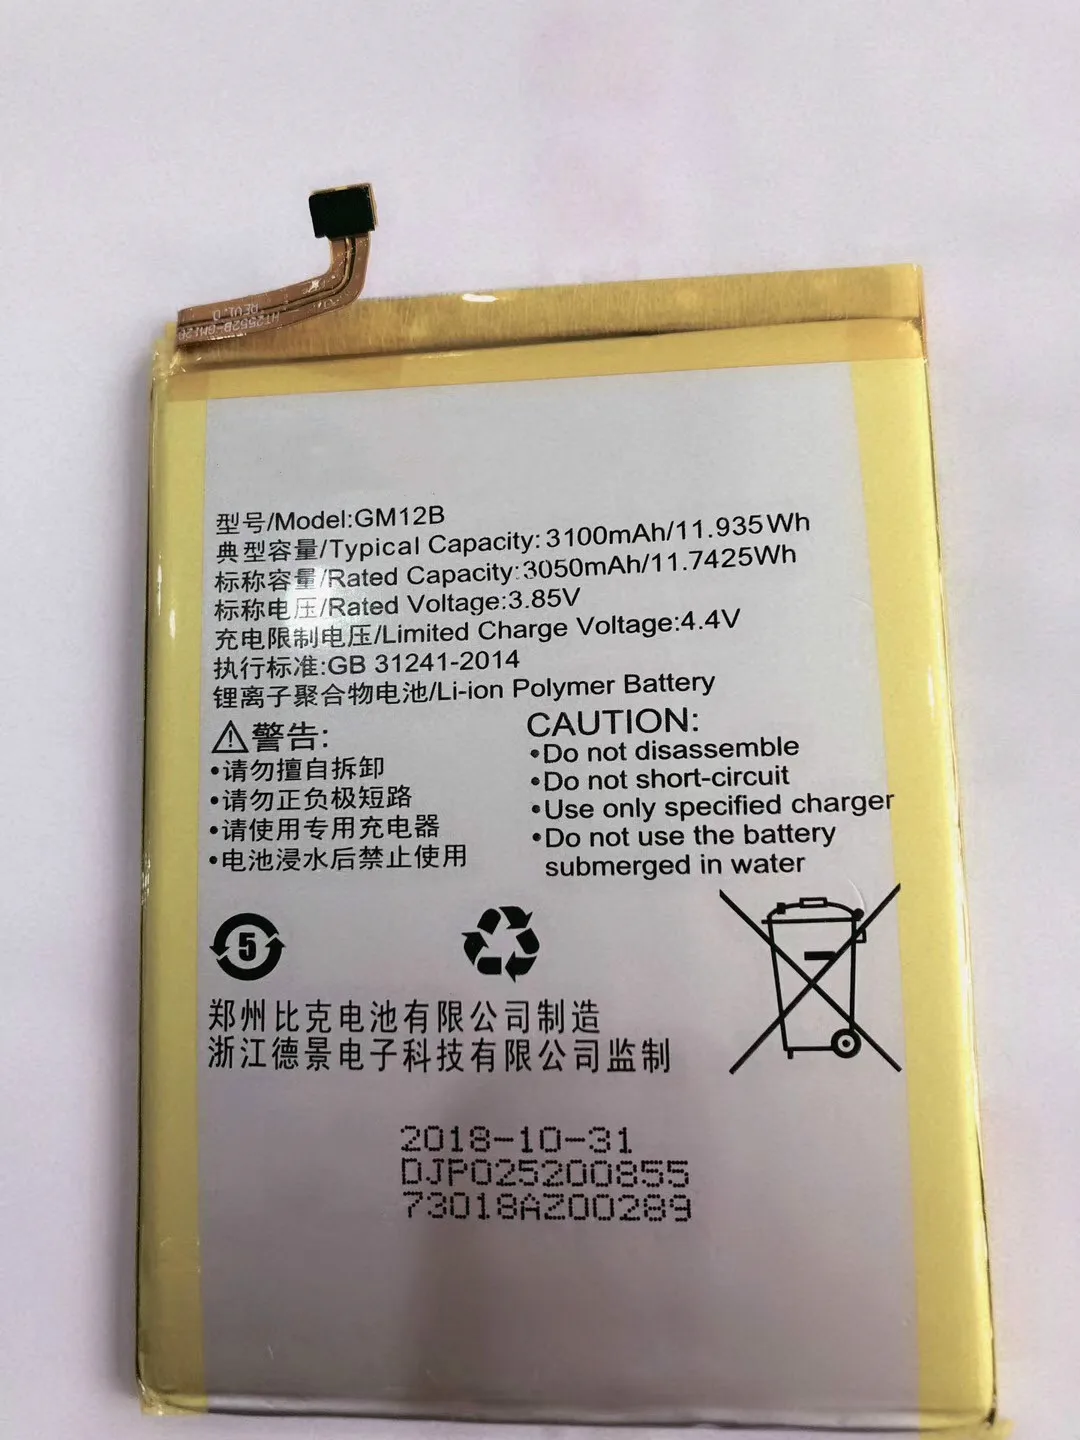 

For Gome Gome U7 Mobile Phone Battery 2017m27a Battery Gm12b Built-in All-in-One Machine Battery